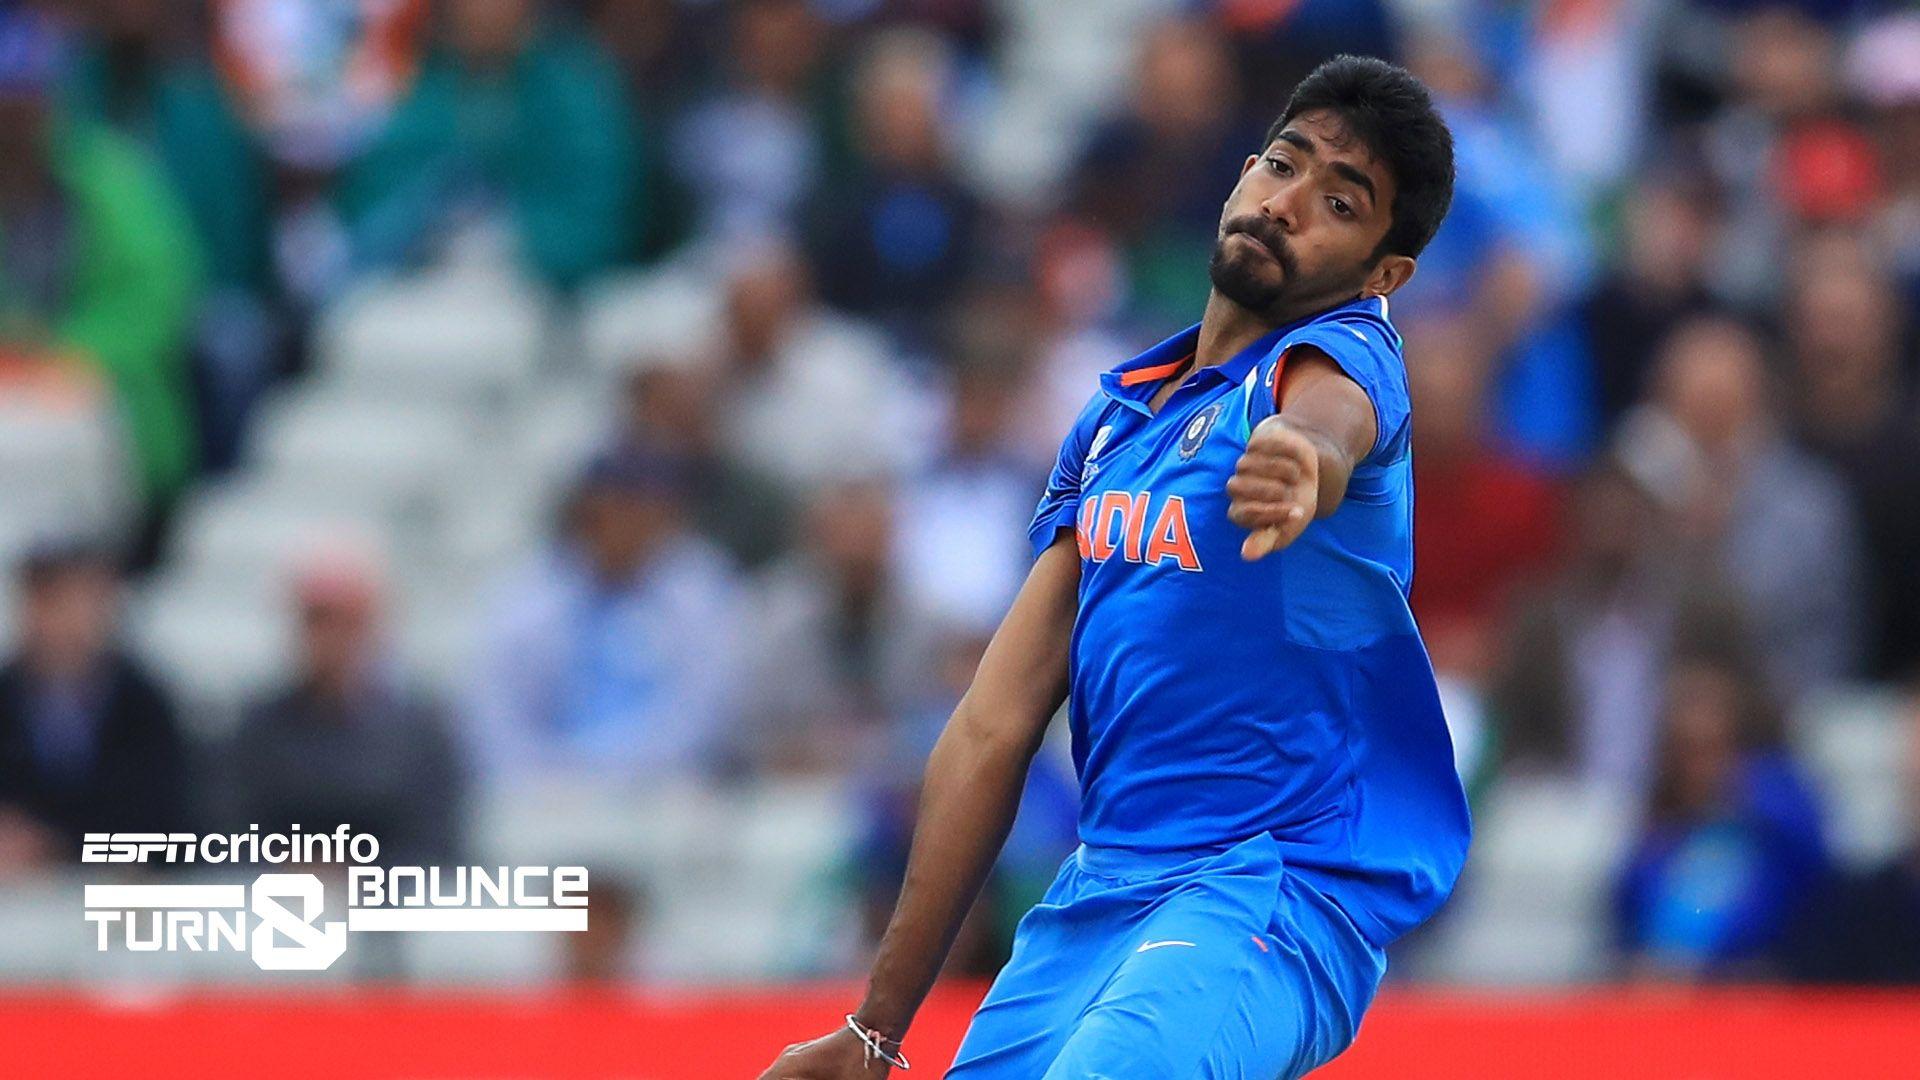 Bumrah's fitness and diet working for him